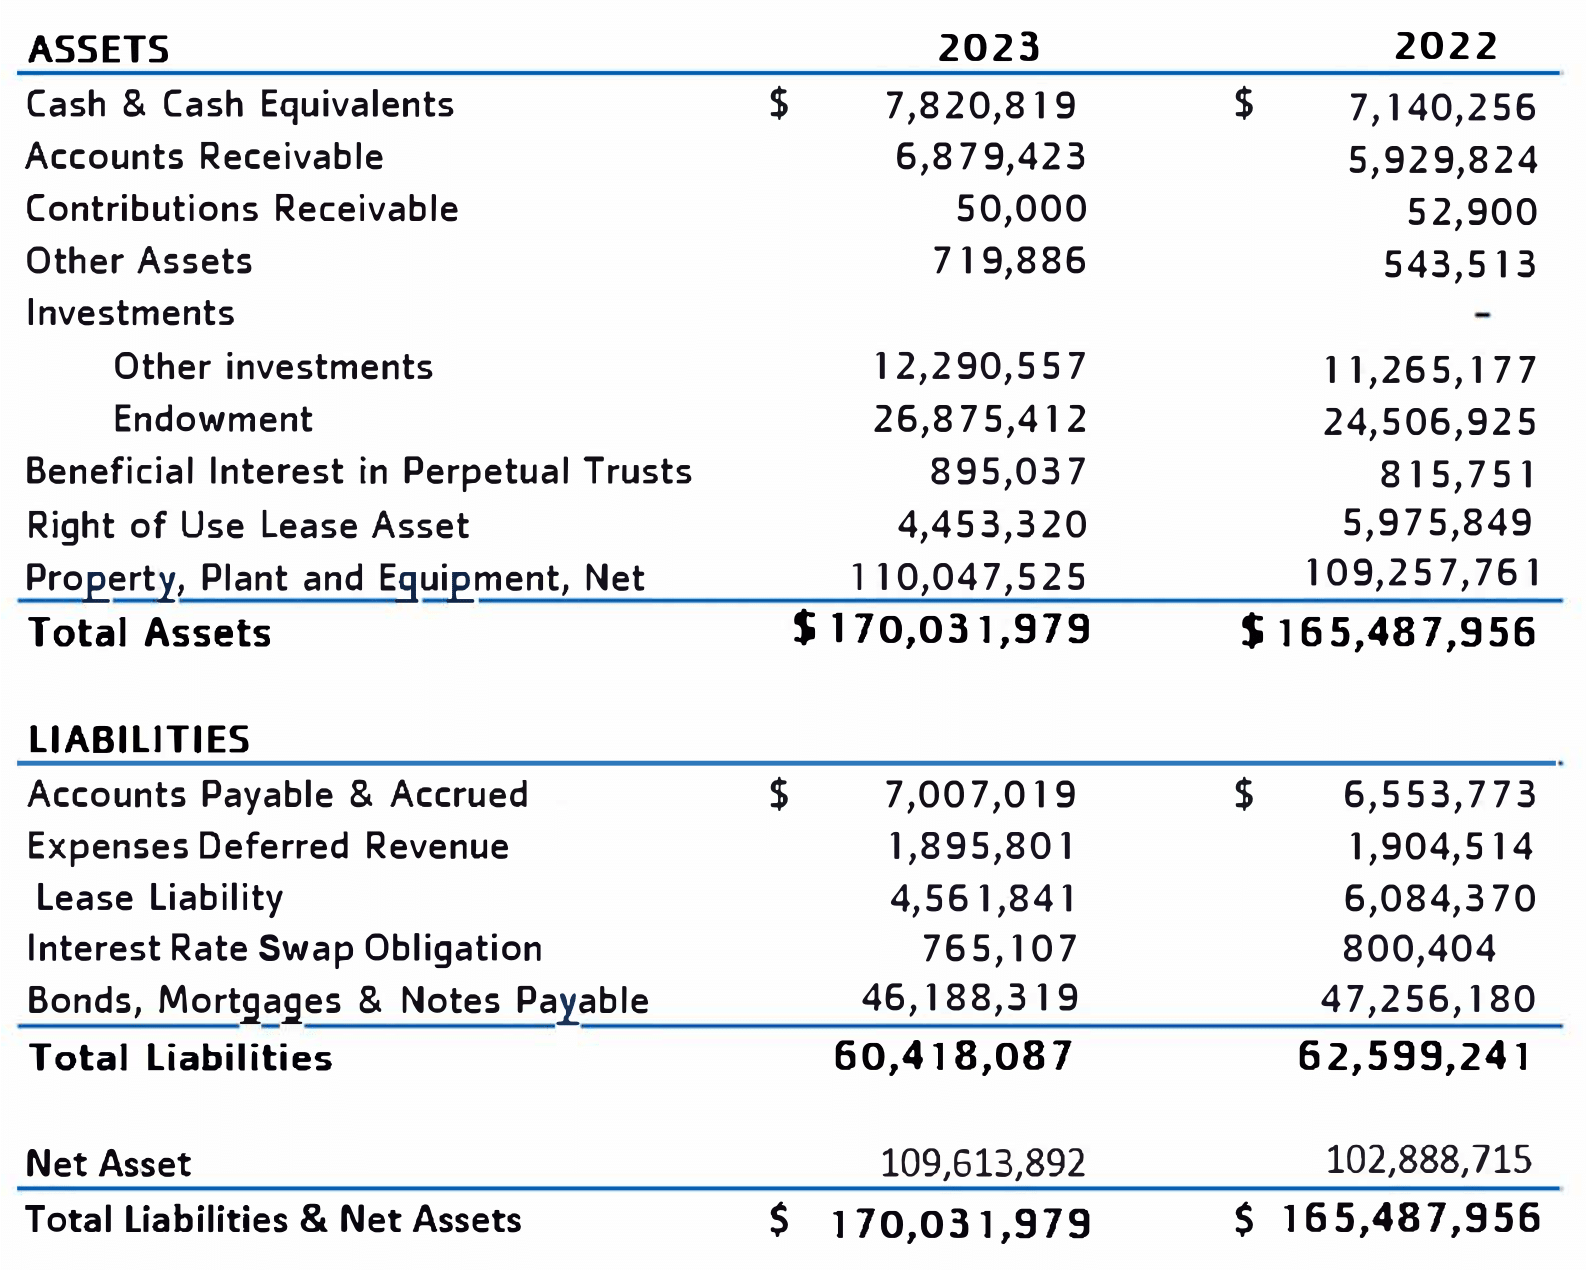 2023 assets and liabilities breakdown